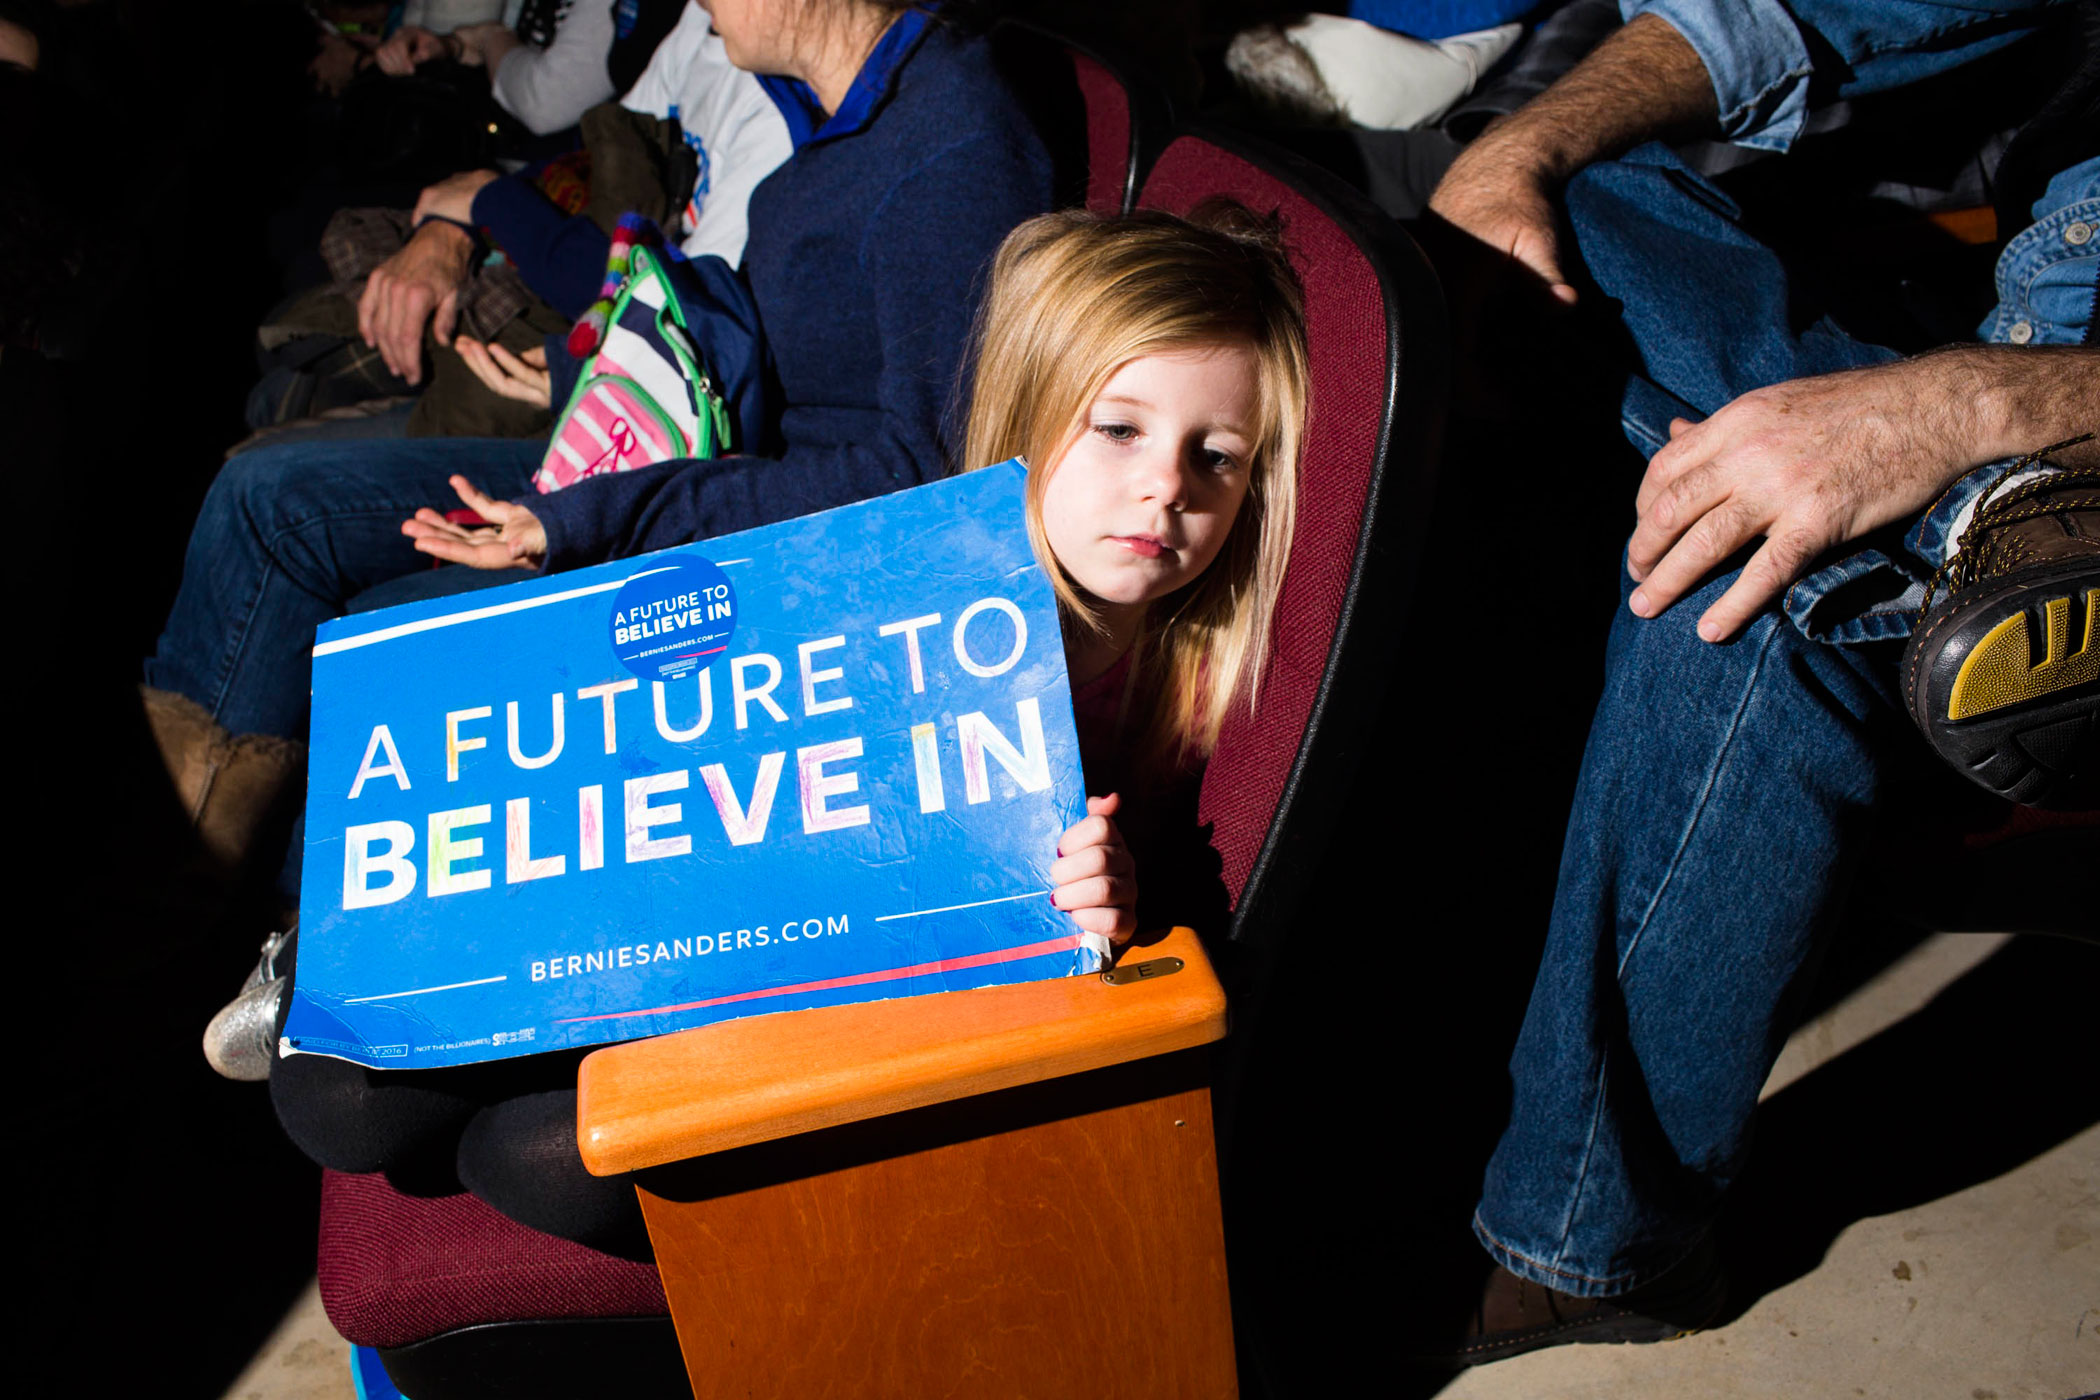 Supporters for Democratic presidential candidate, Vermont Sen. Bernie Sanders attend a campaign event at Pinkerton Academy on M Feb. 8, 2016, in Derry, N.H.